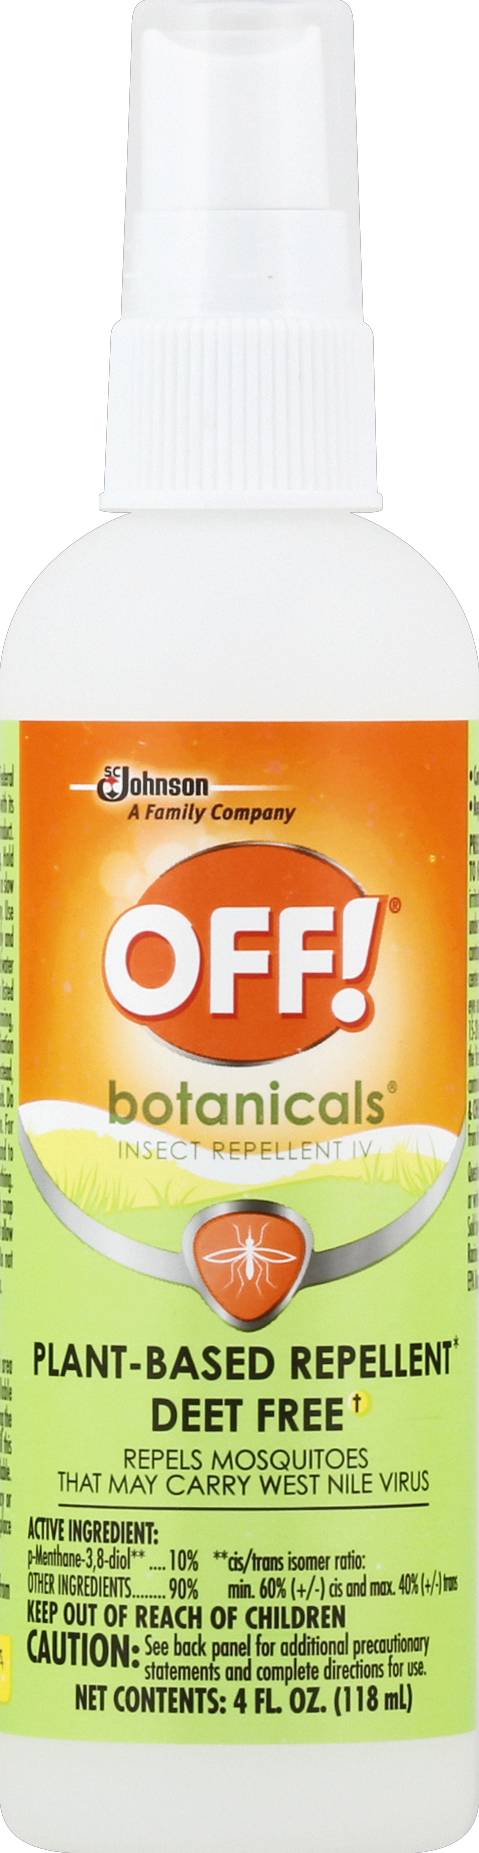 Off! Botanicals Insect Repellent Iv